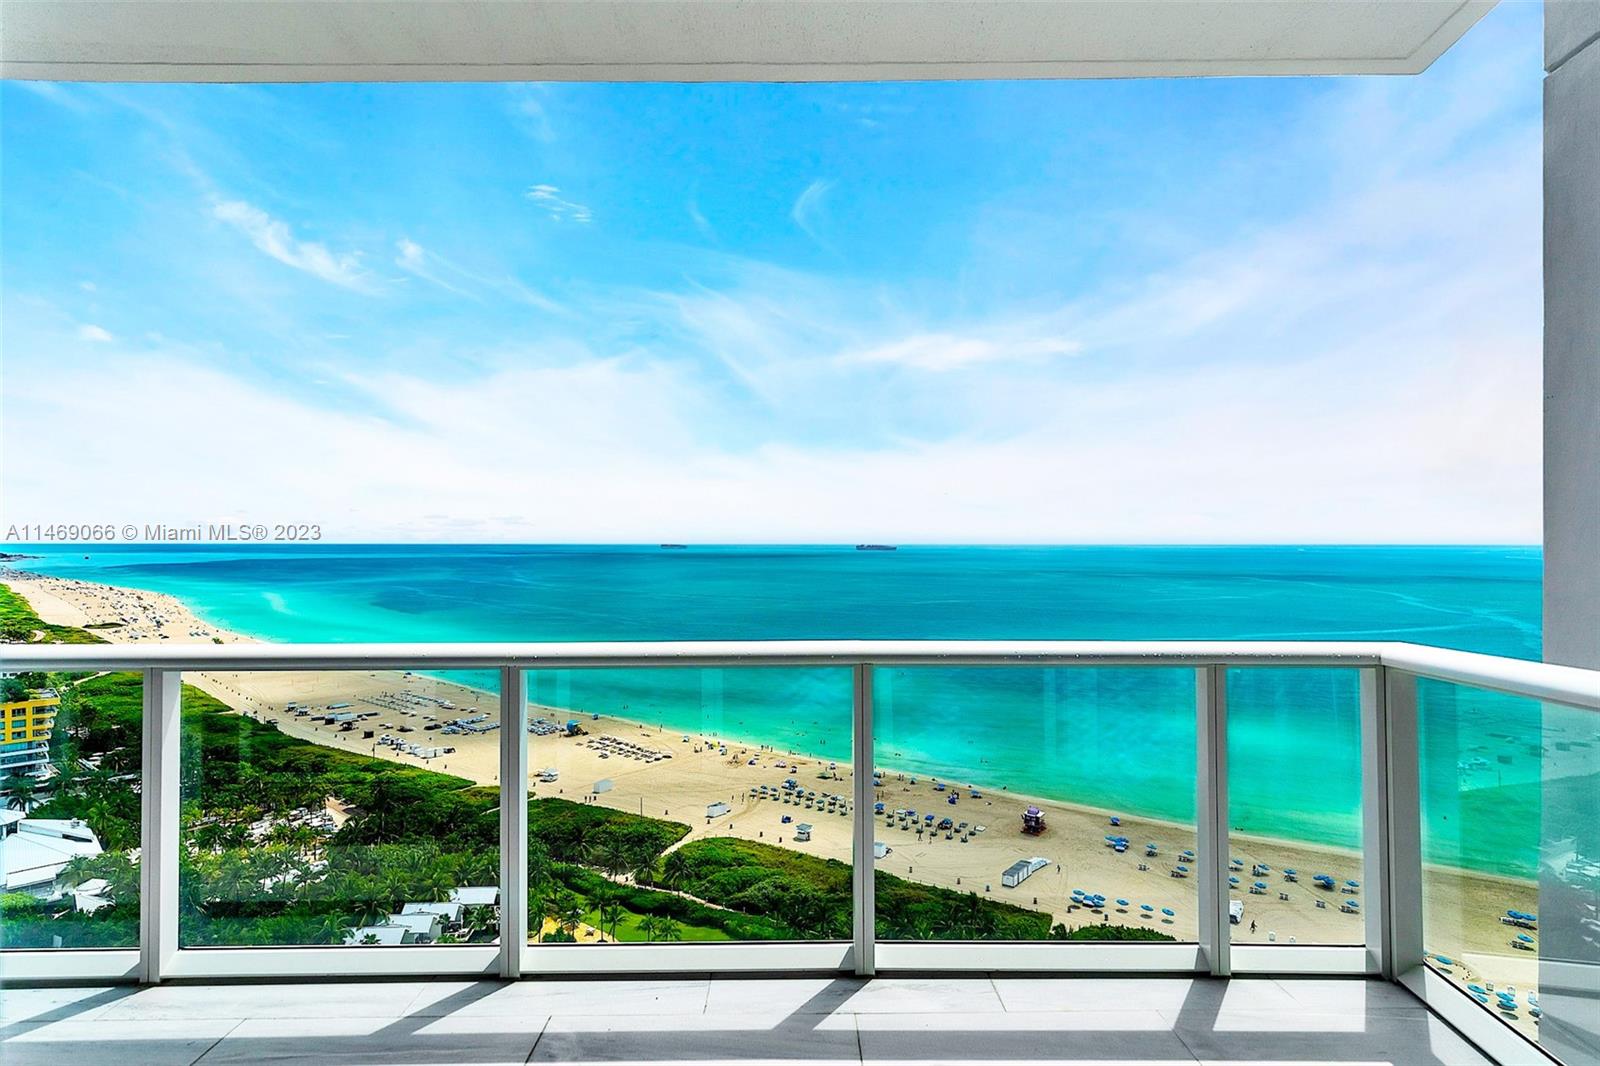 A stunning renovated apartment oceanfront & center of the renowned Continuum resort. This 2 bedroom split floor plan features a spacious open living area with a large balcony accessible from each room. Stepping into the private foyer the WOW factor is evident. Marvel at the sparkling blue ocean & vast sweeping views of Miami Beach through this modern designed light filled unit with high ceilings. A splendid turn key combination offering a distinctive luxurious Continuum lifestyle with 5-star amenities.